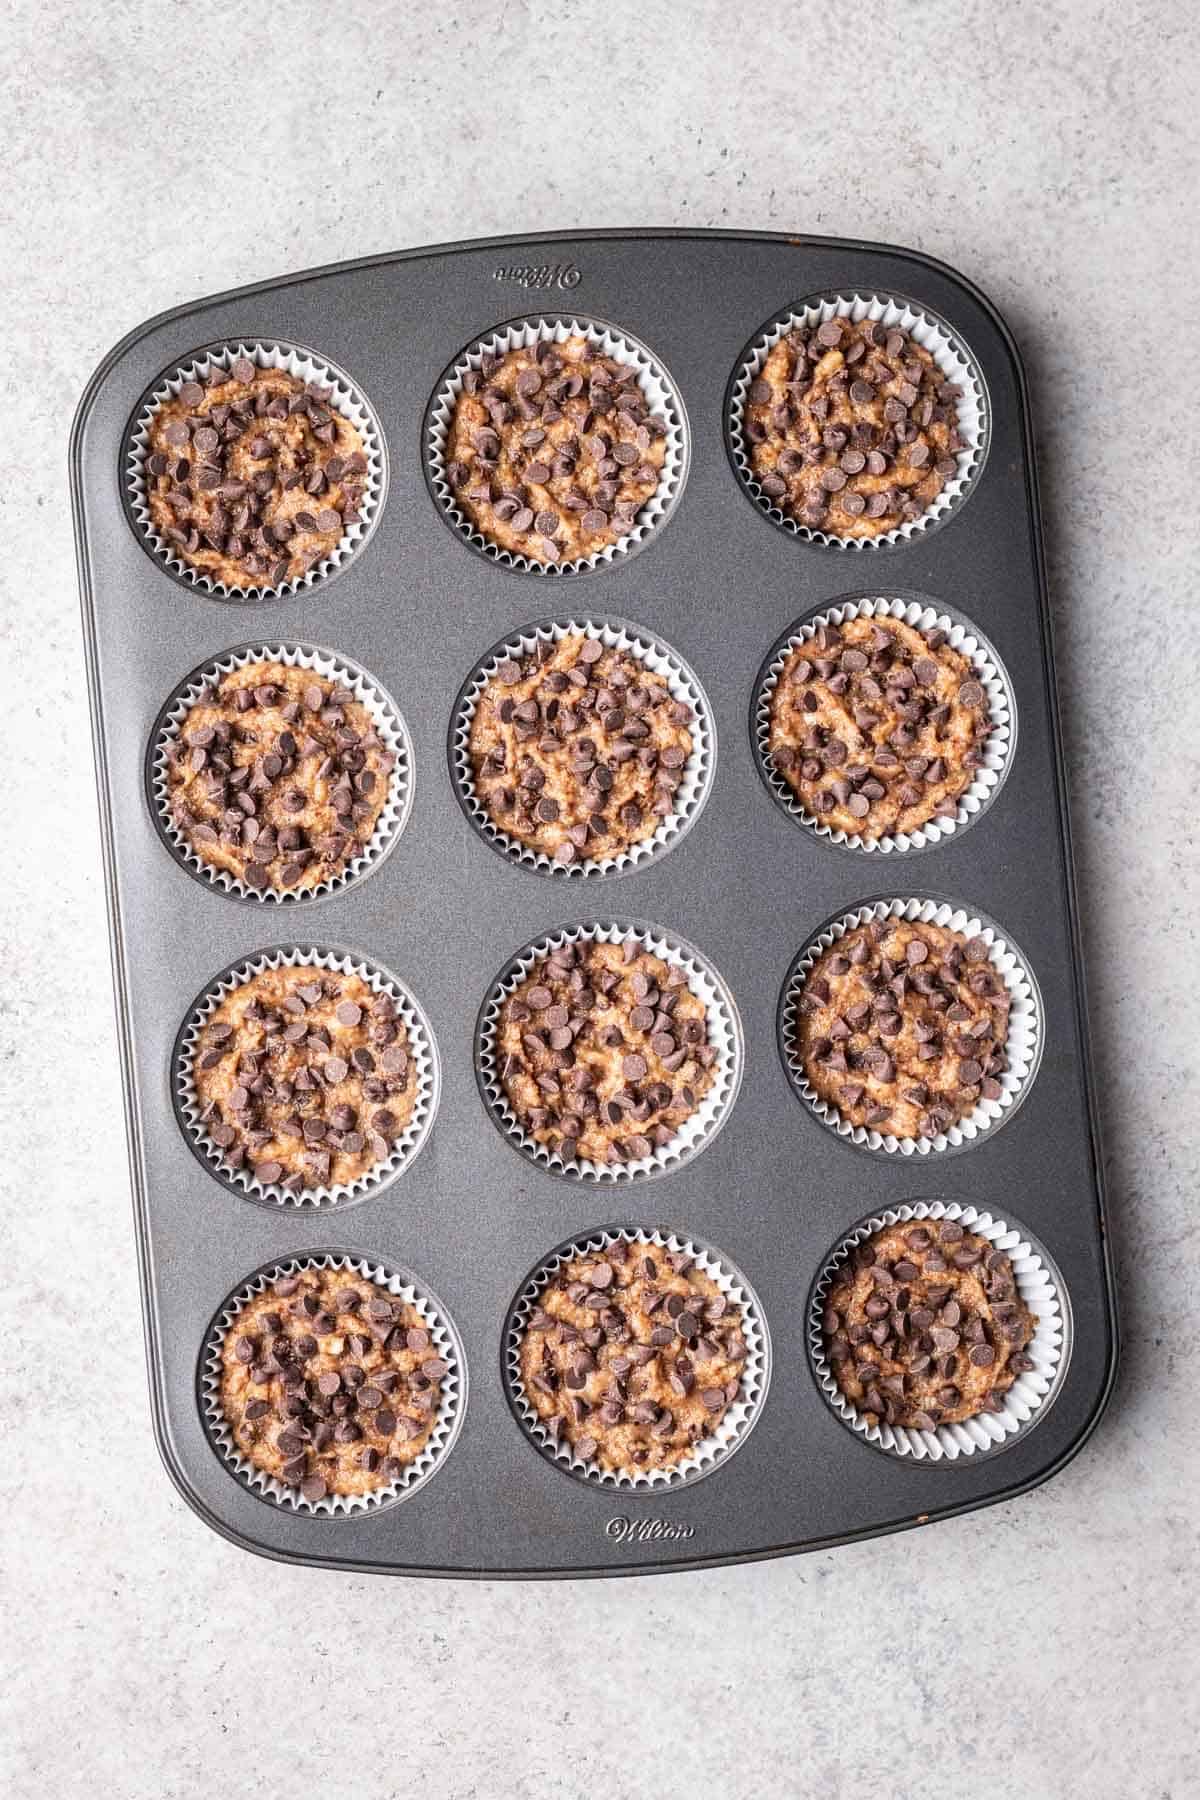 Muffin batter topped with mini chocolate chips in muffin tin before baking.